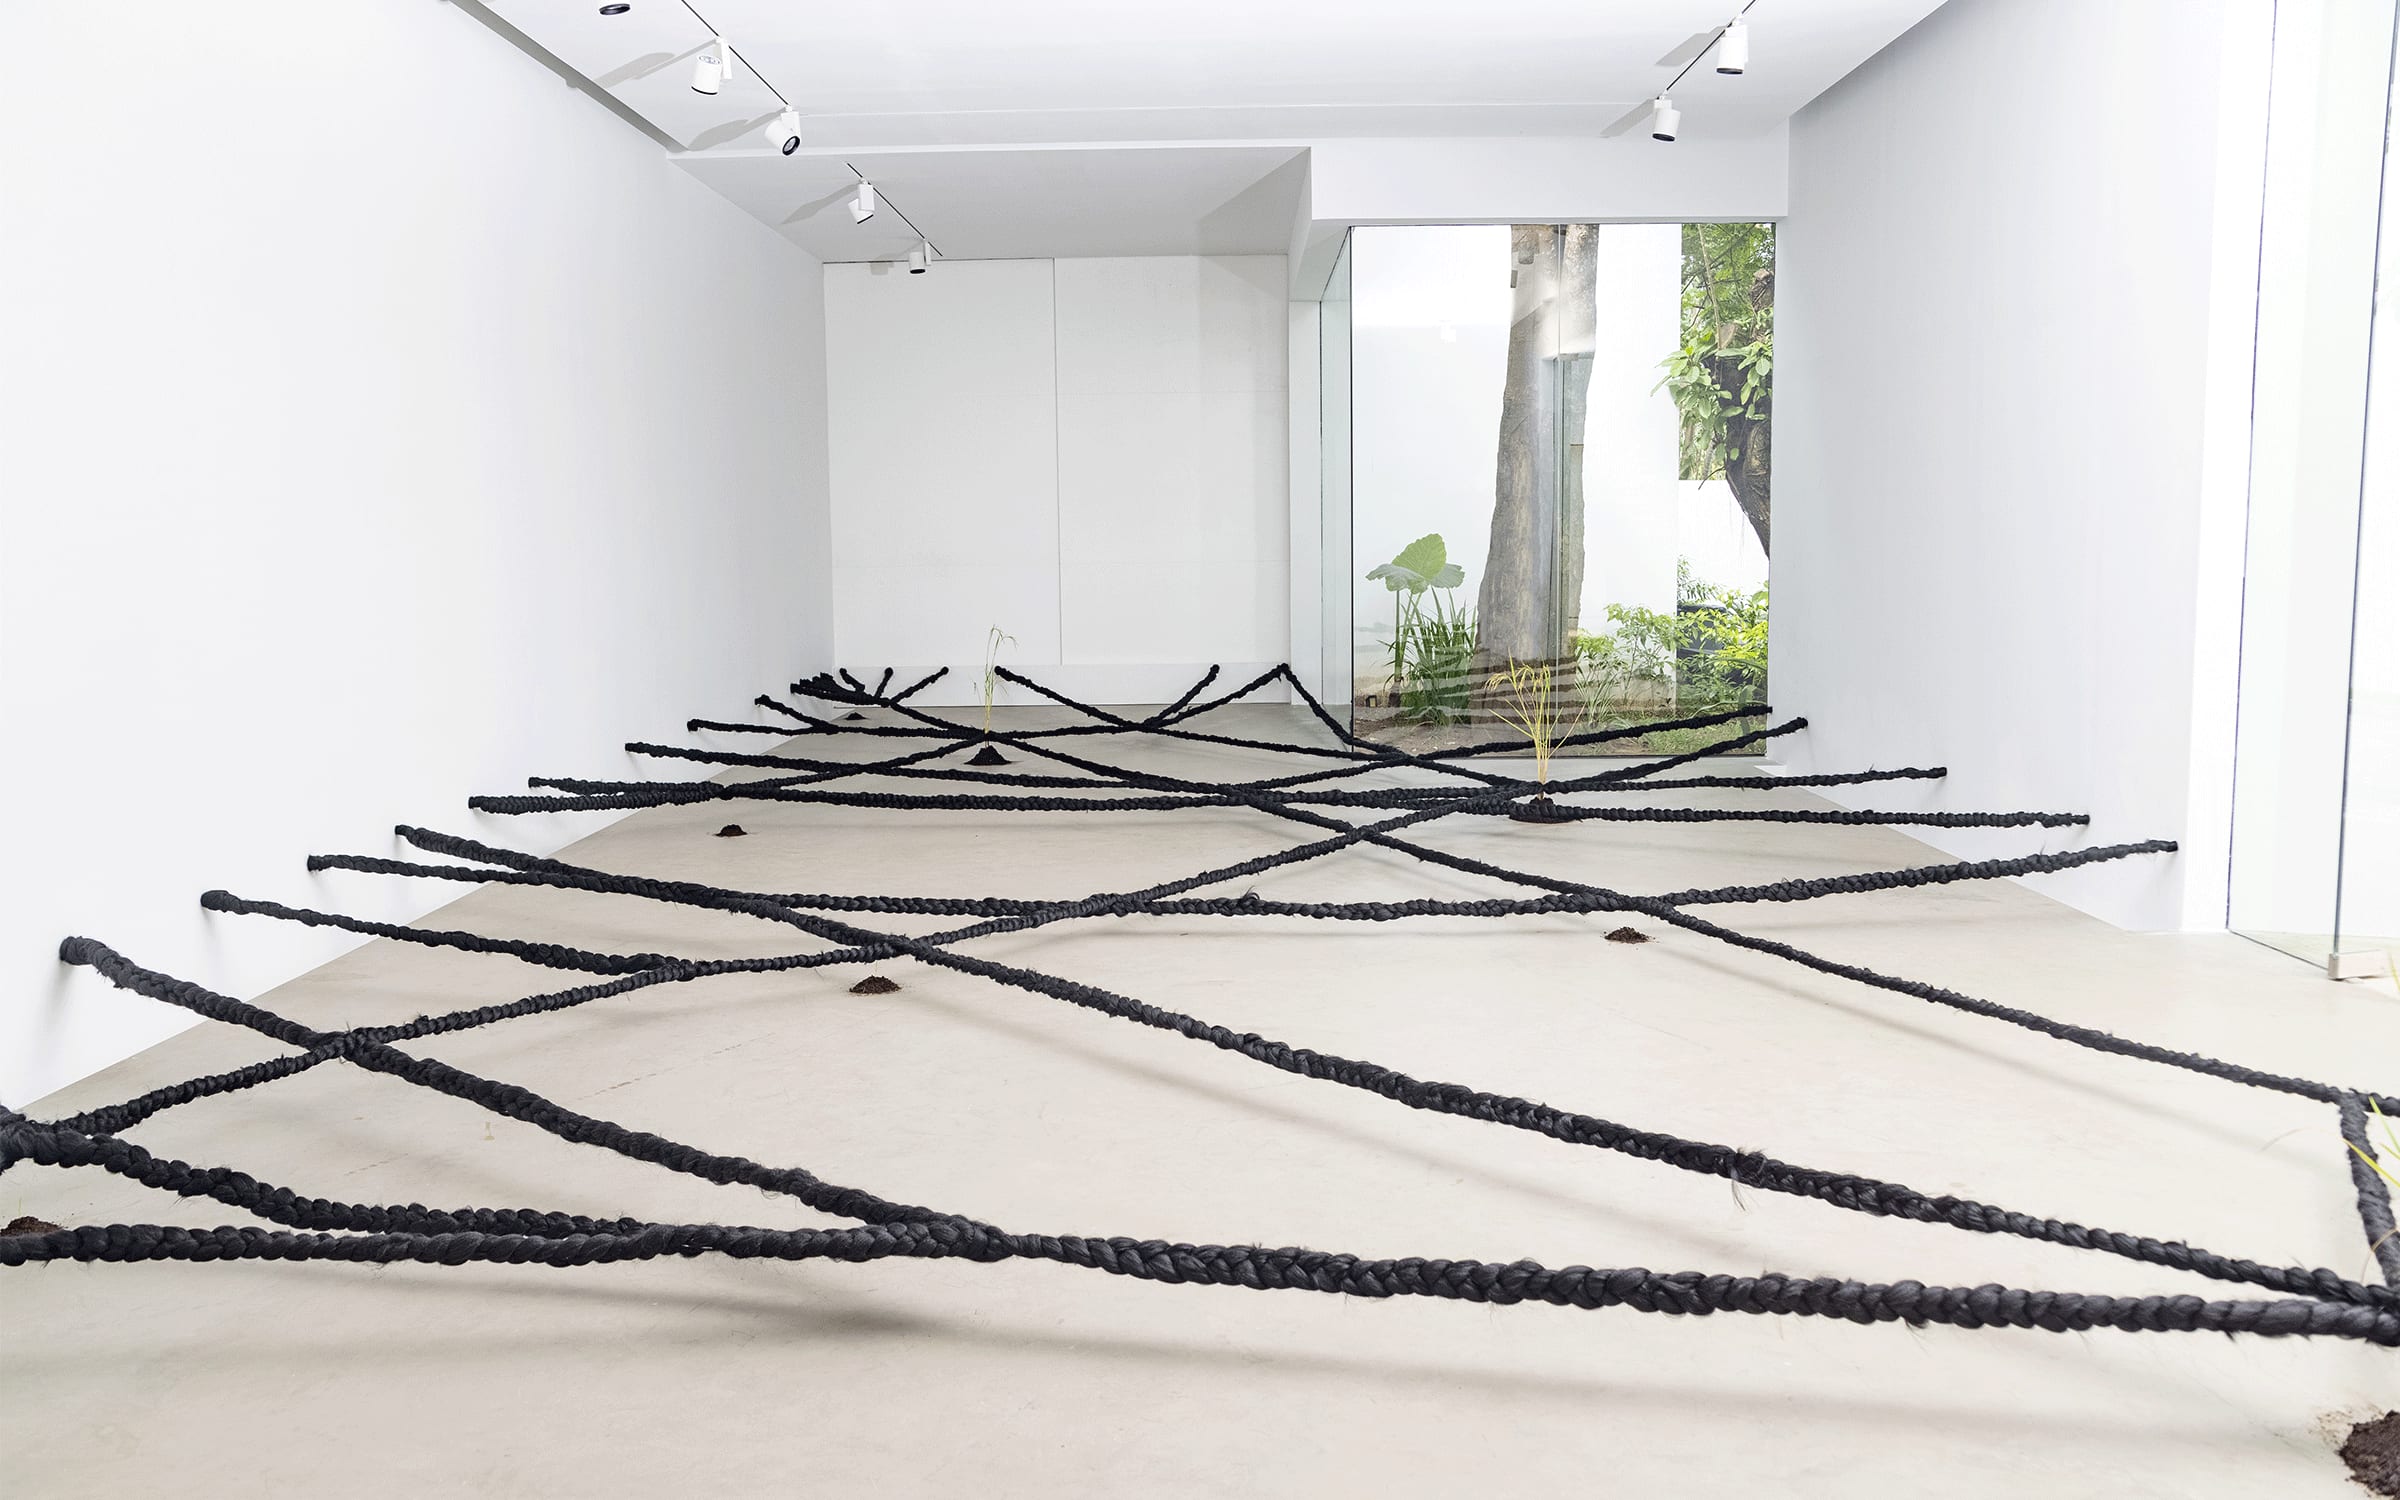 Installation view of Binta Diaw’s artwork Dïà s p o r a, 2021. Courtesy of the artist and Galerie Cécile Fakhoury.